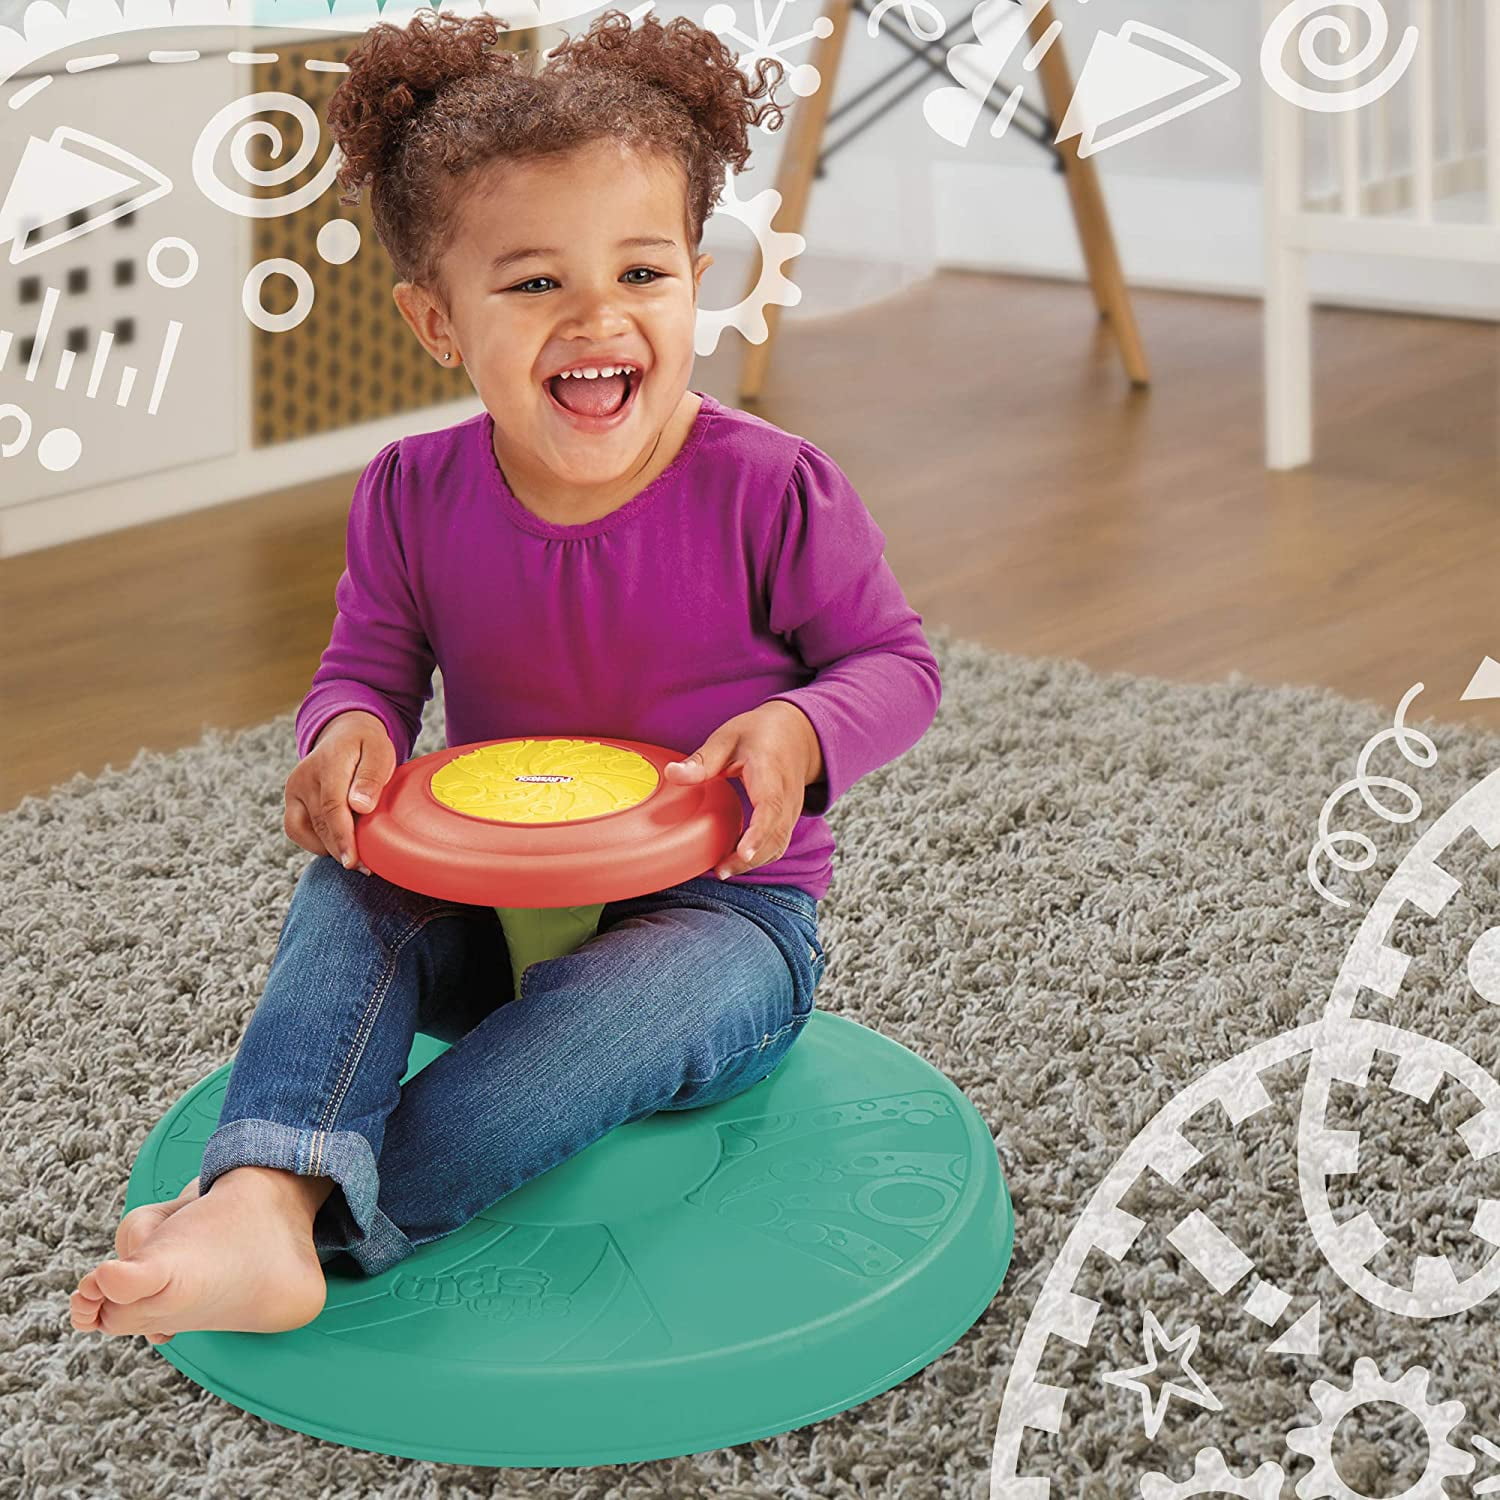 Playskool 34451 Play Favorites Sit and Spin Toy for sale online 